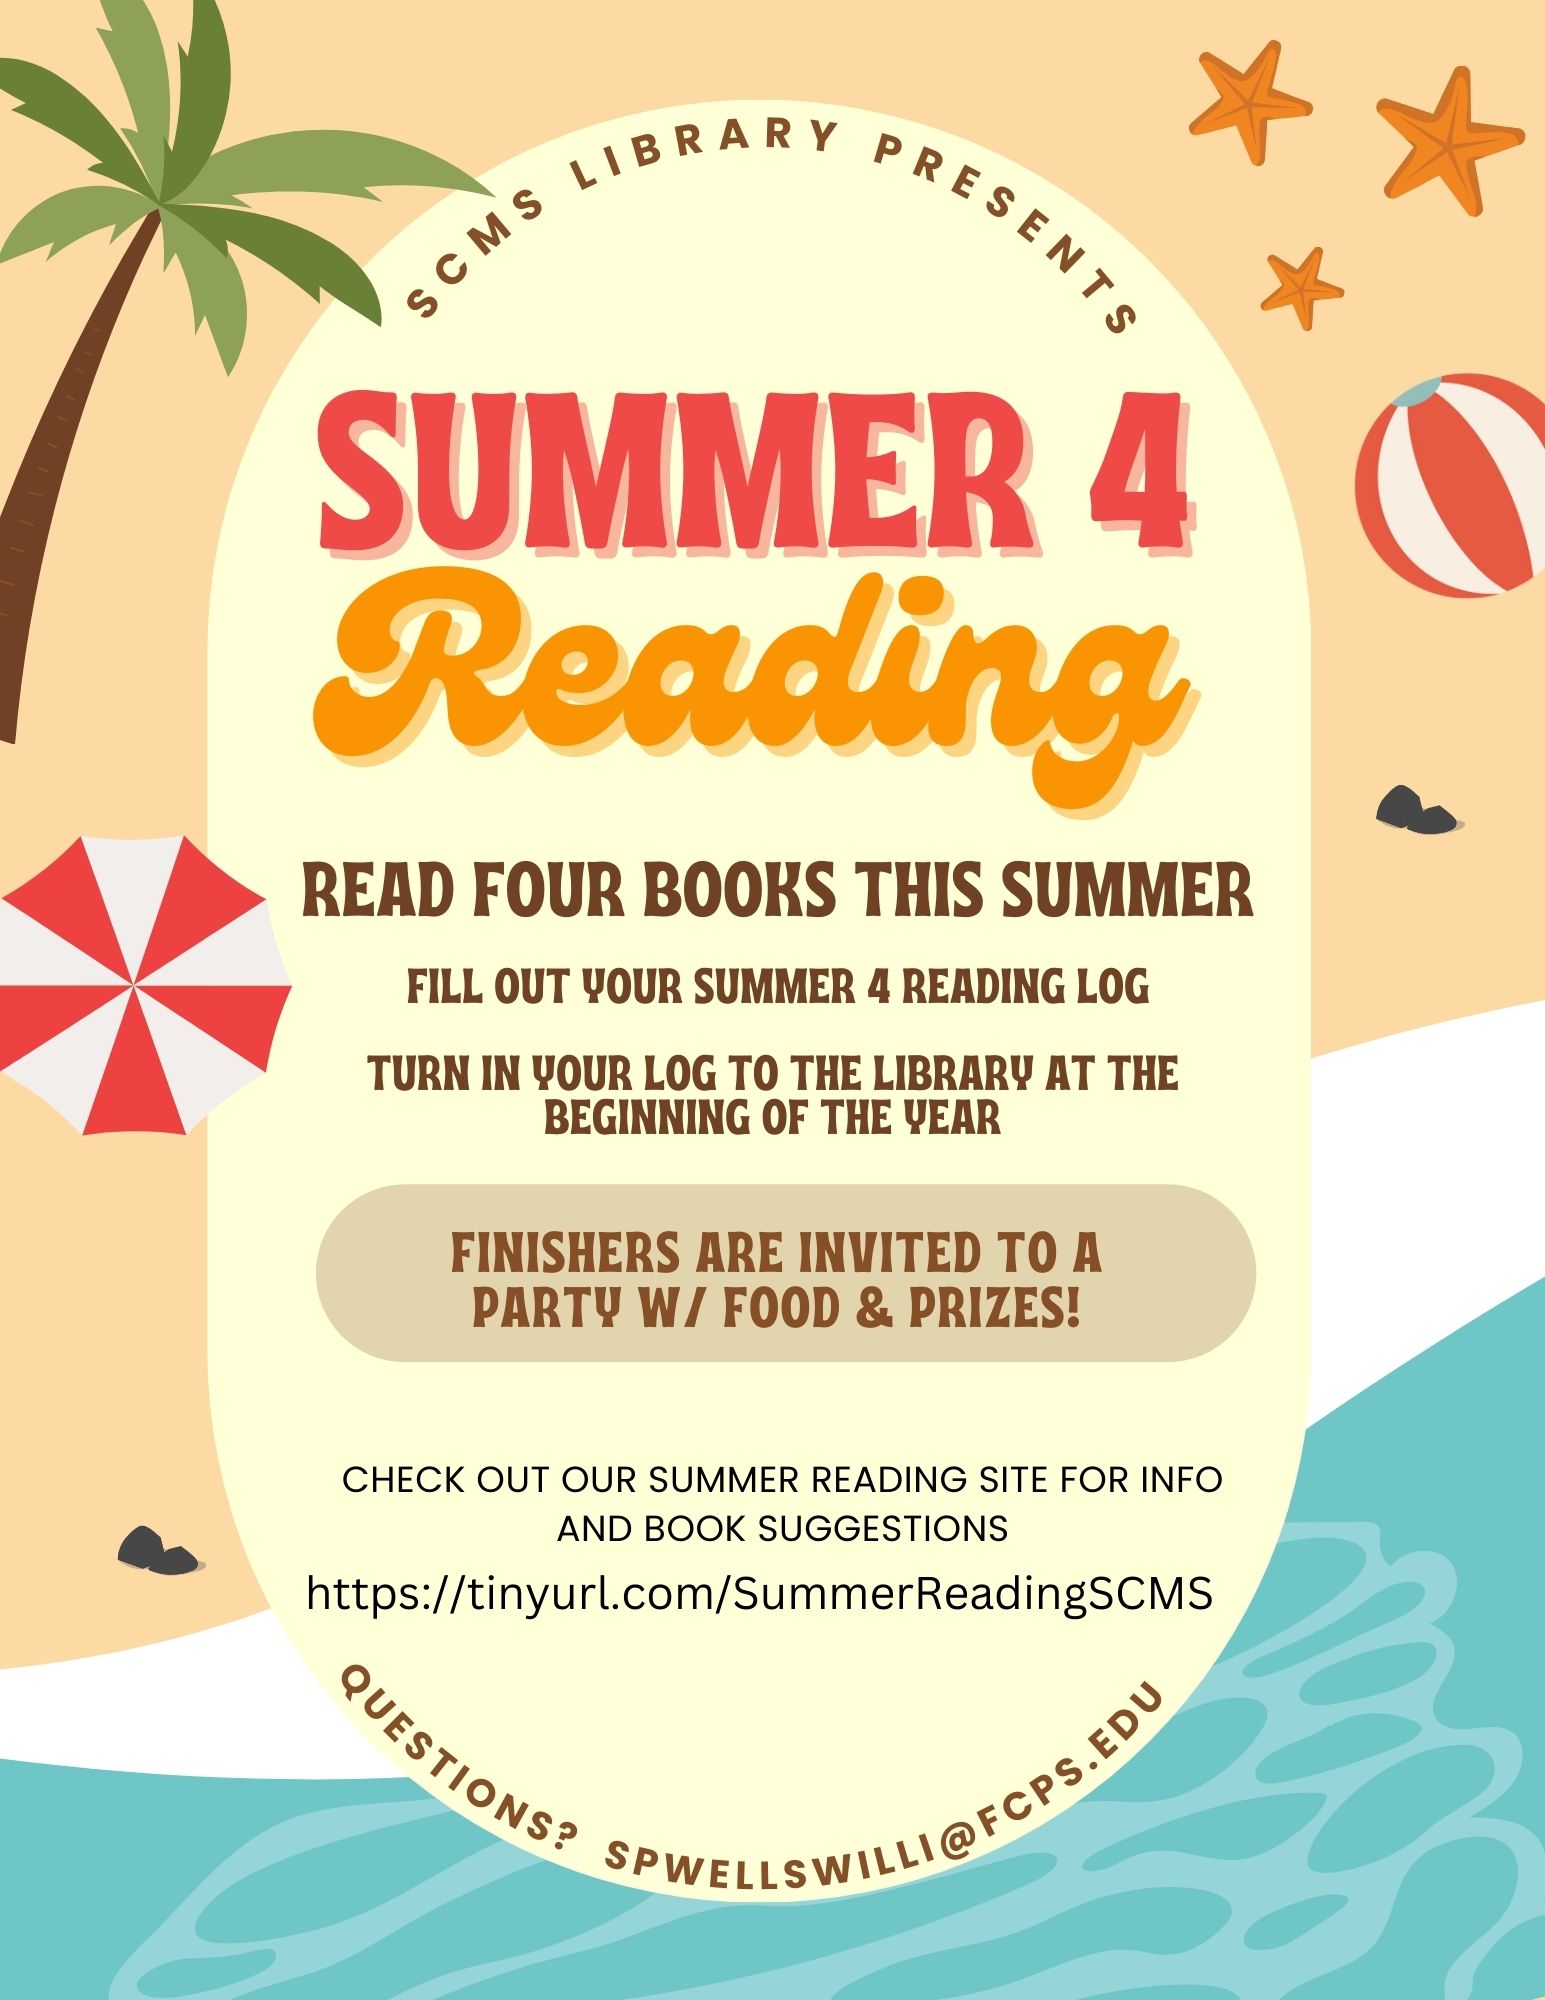 Summer4Reading Flier.  Read 4 books this summer, fill out a reading log, and turn it into the SCMS Library at the beginning of the year.